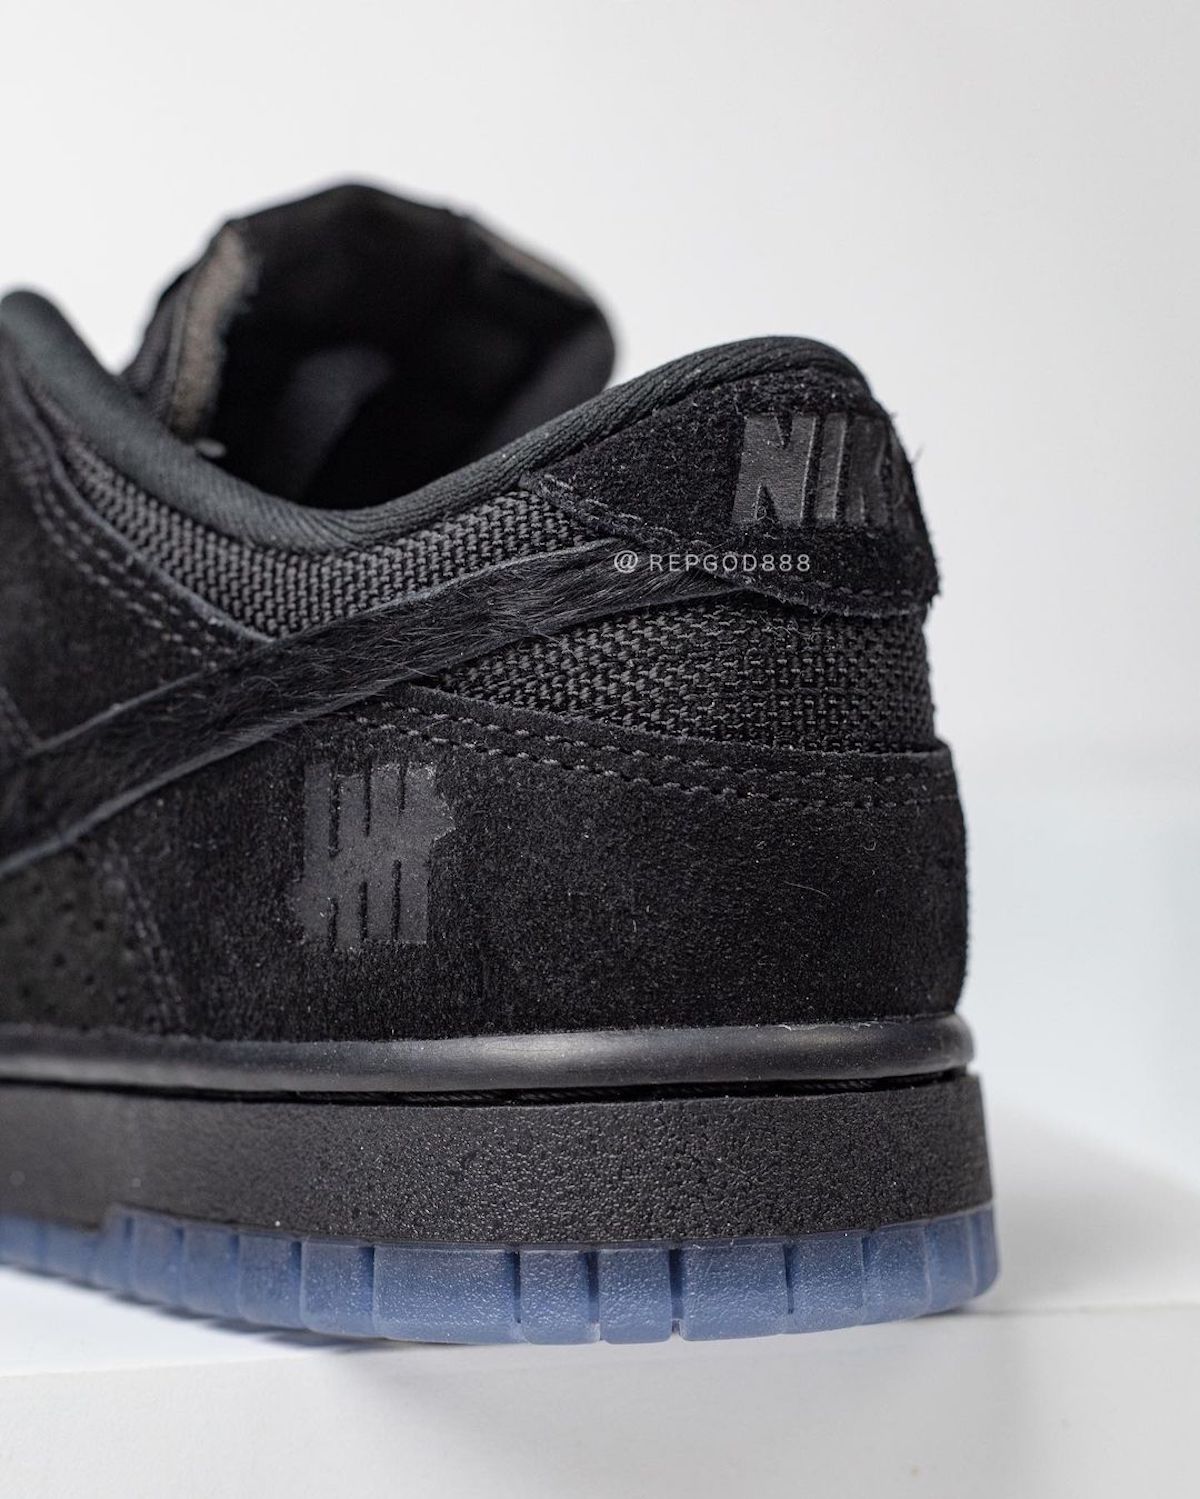 Undefeated x Nike Dunk Low Black Dunk vs AF-1 Pack Zdjecia 11